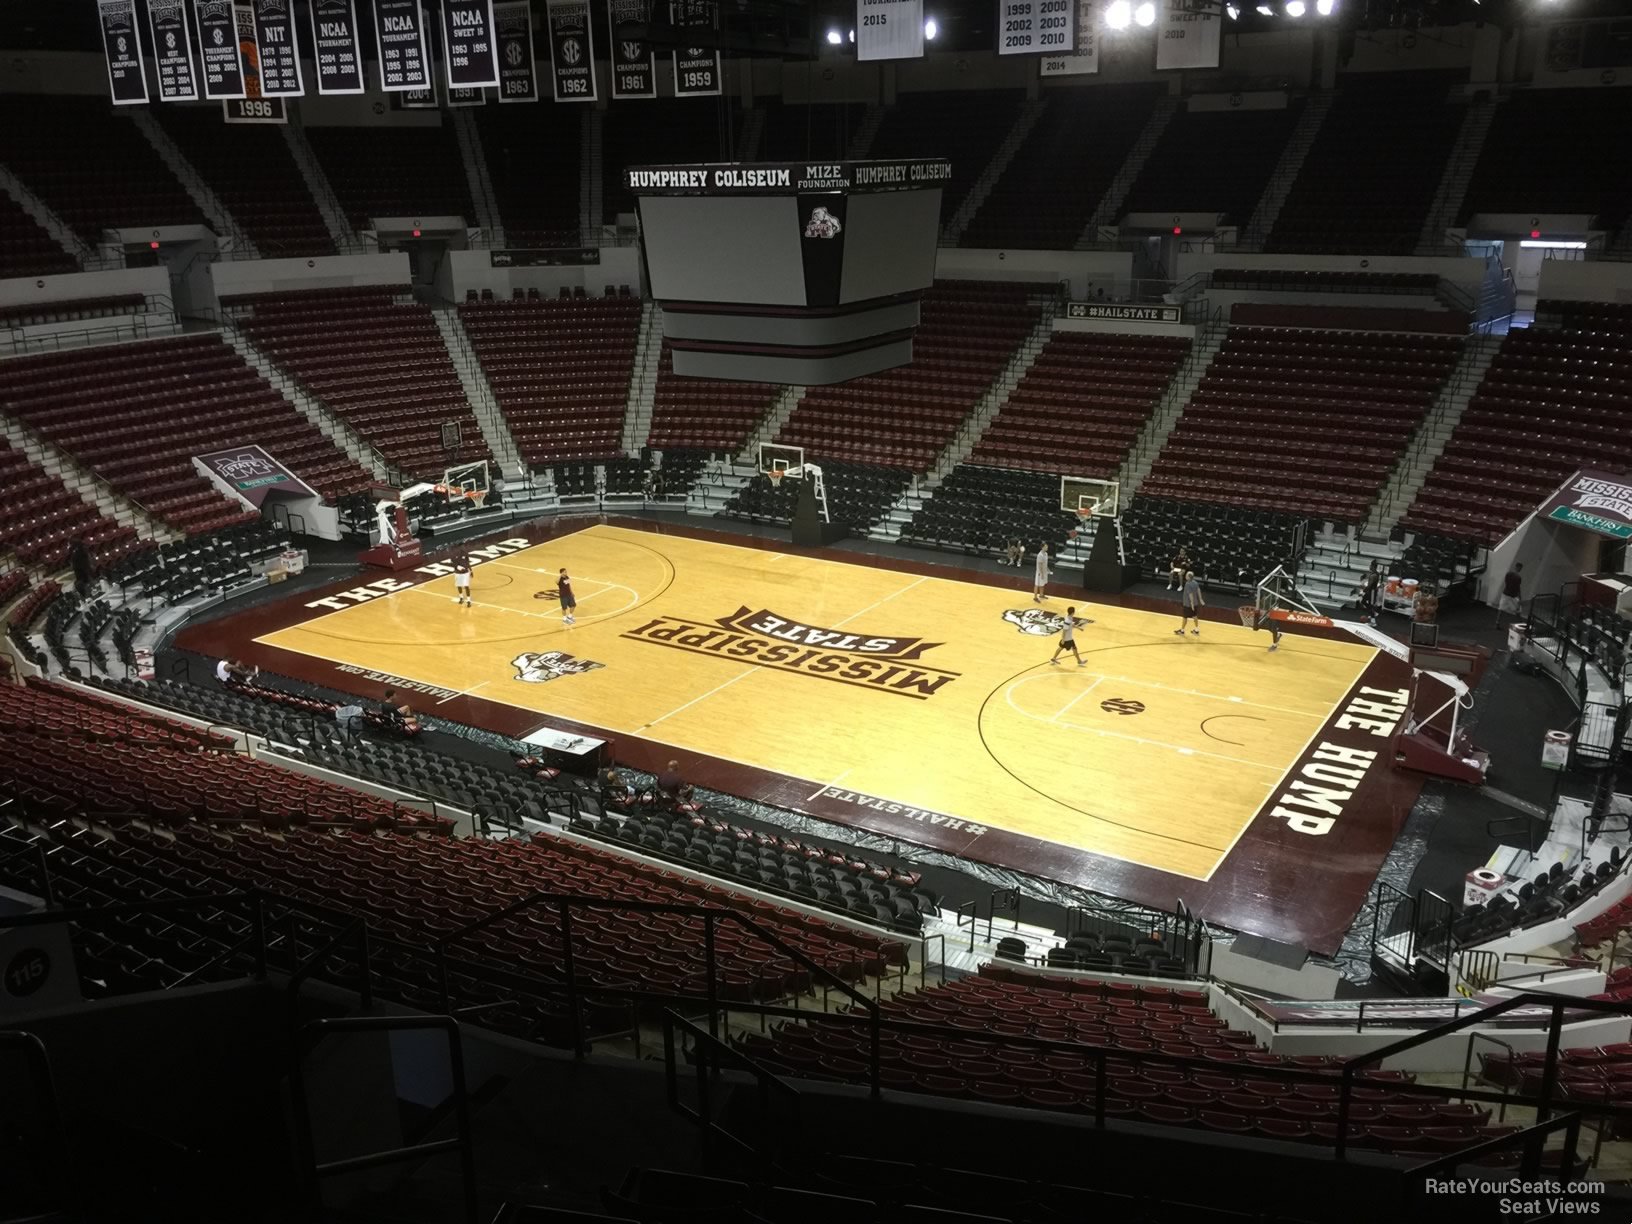 section 225, row 8 seat view  - humphrey coliseum